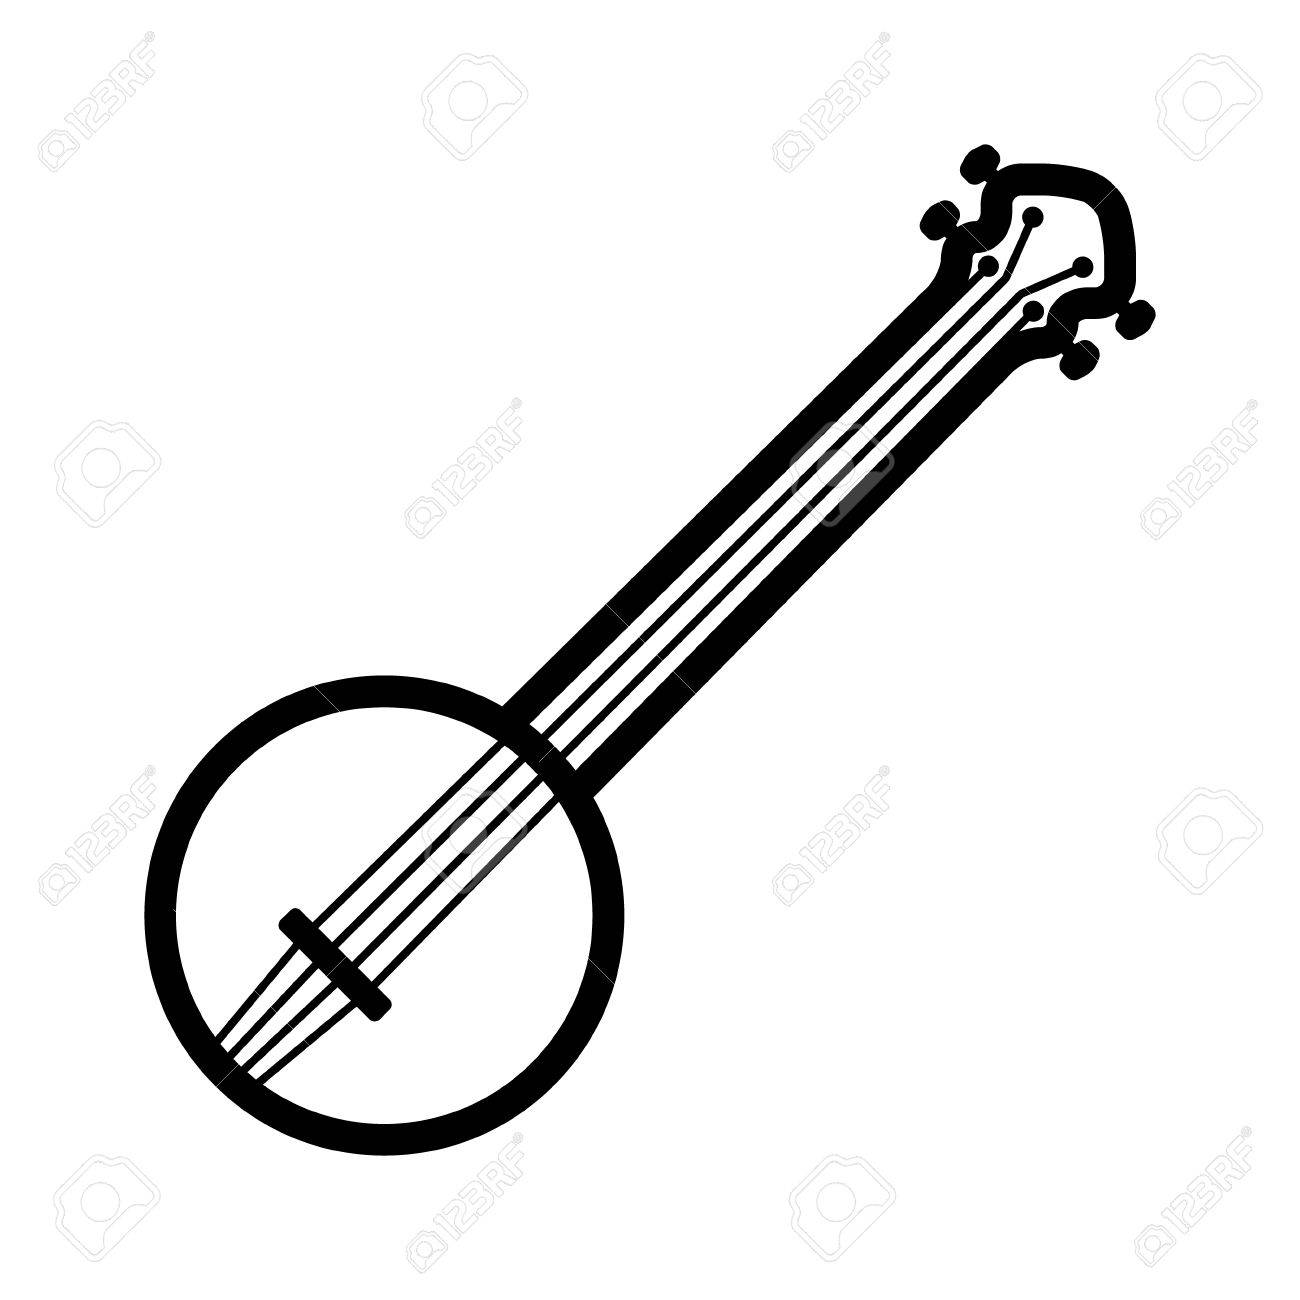 Cliparts free download best. Banjo clipart black and white